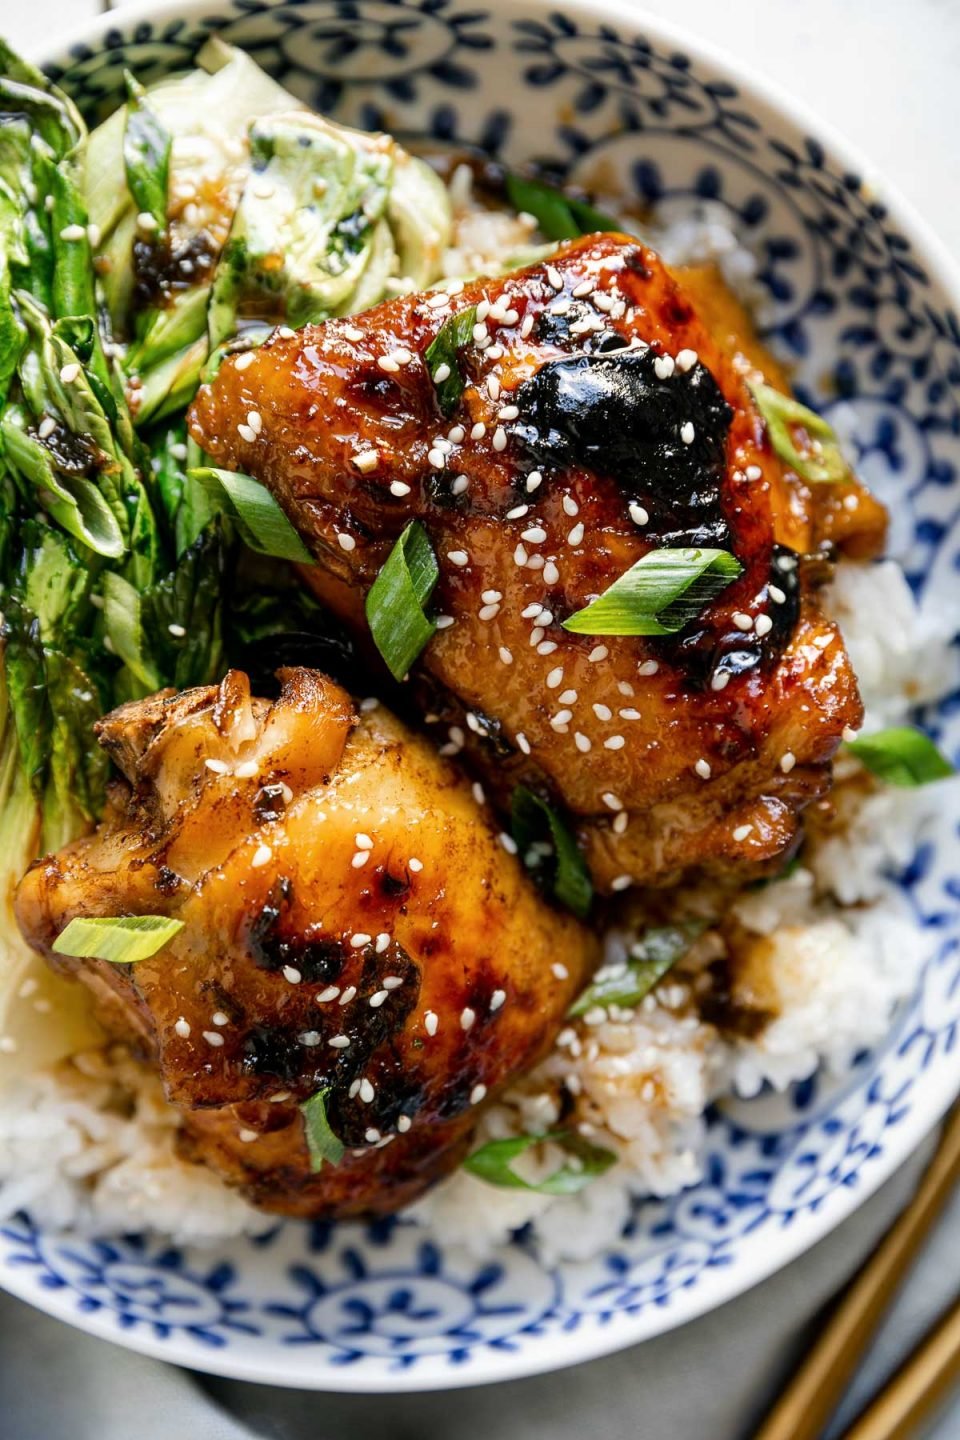 Close up of shoyu chicken plated in a floral-patterened blue dish over rice with bok choy. The chicken is garnished with sliced green onions & sesame seeds. The bowl sits atop a white surface, next to a blue linen napkin & gold flatware.